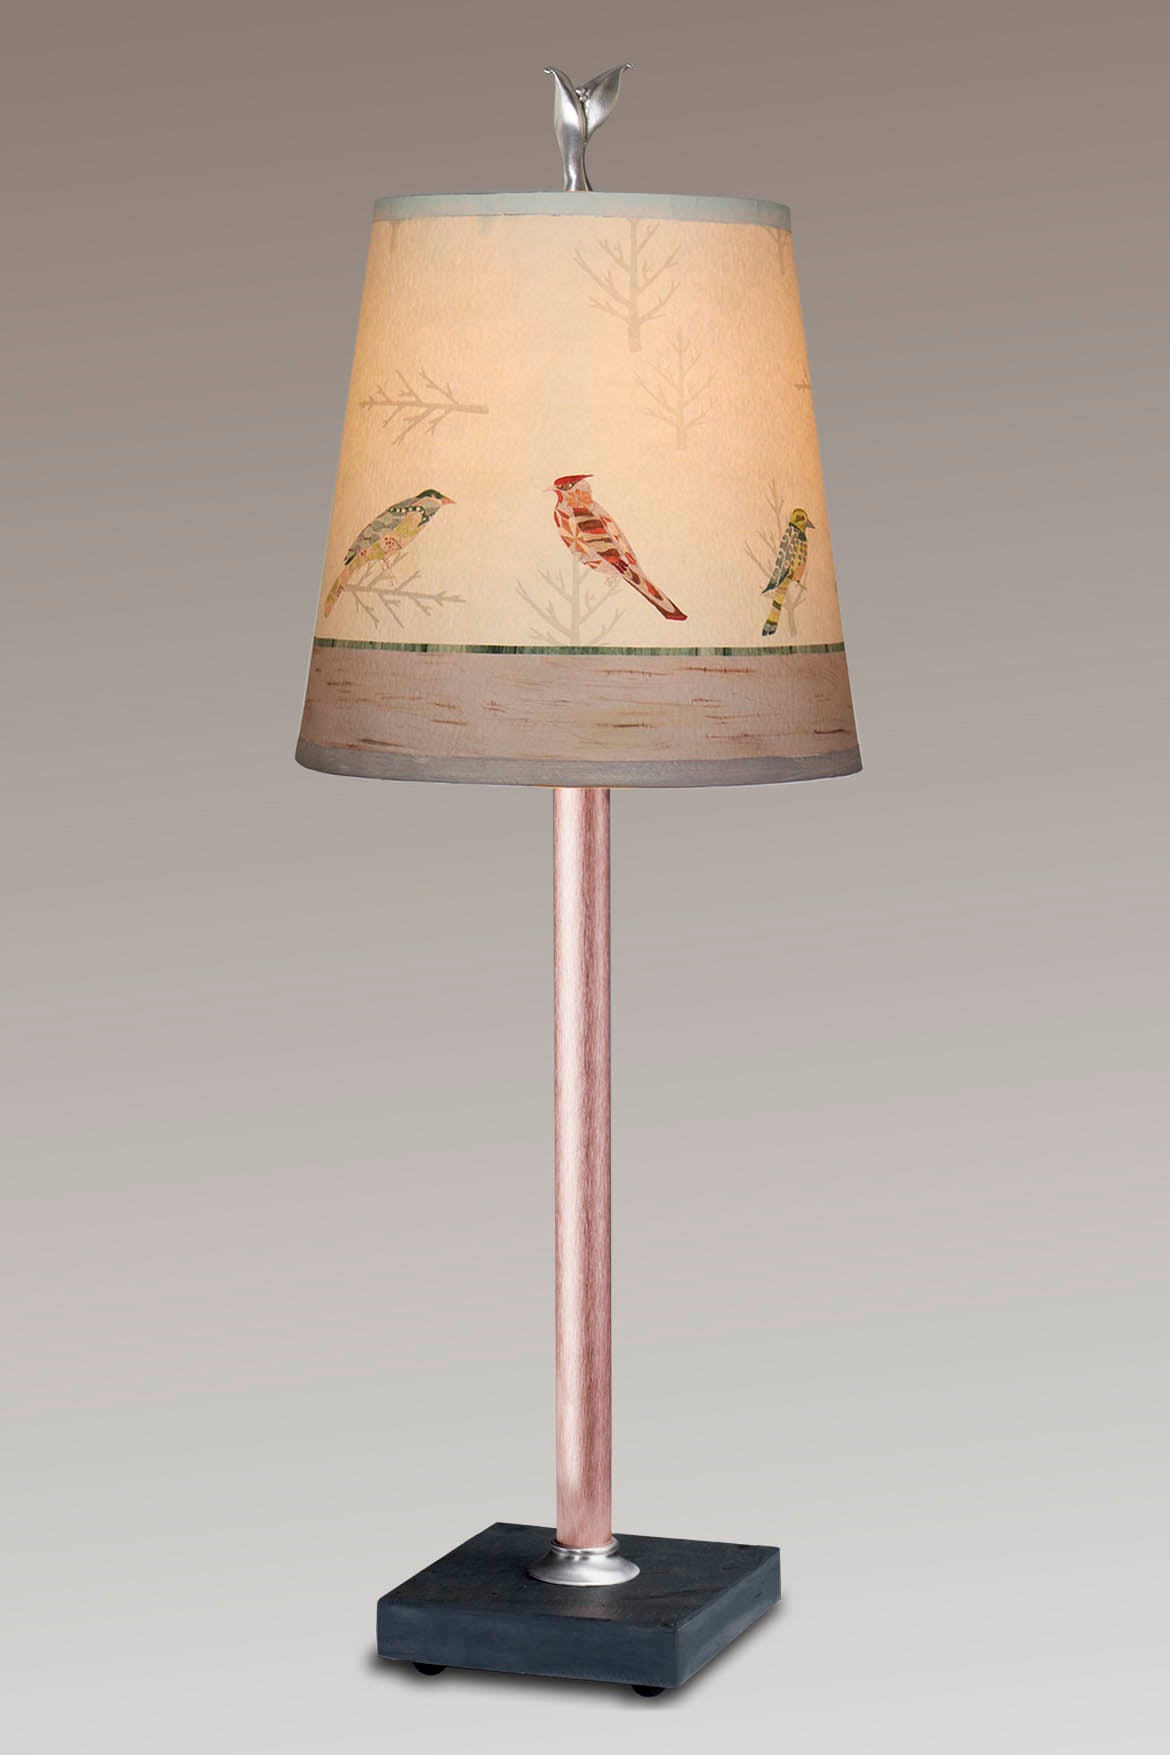 Janna Ugone & Co Table Lamp Copper Table Lamp with Small Drum Shade in Bird Friends